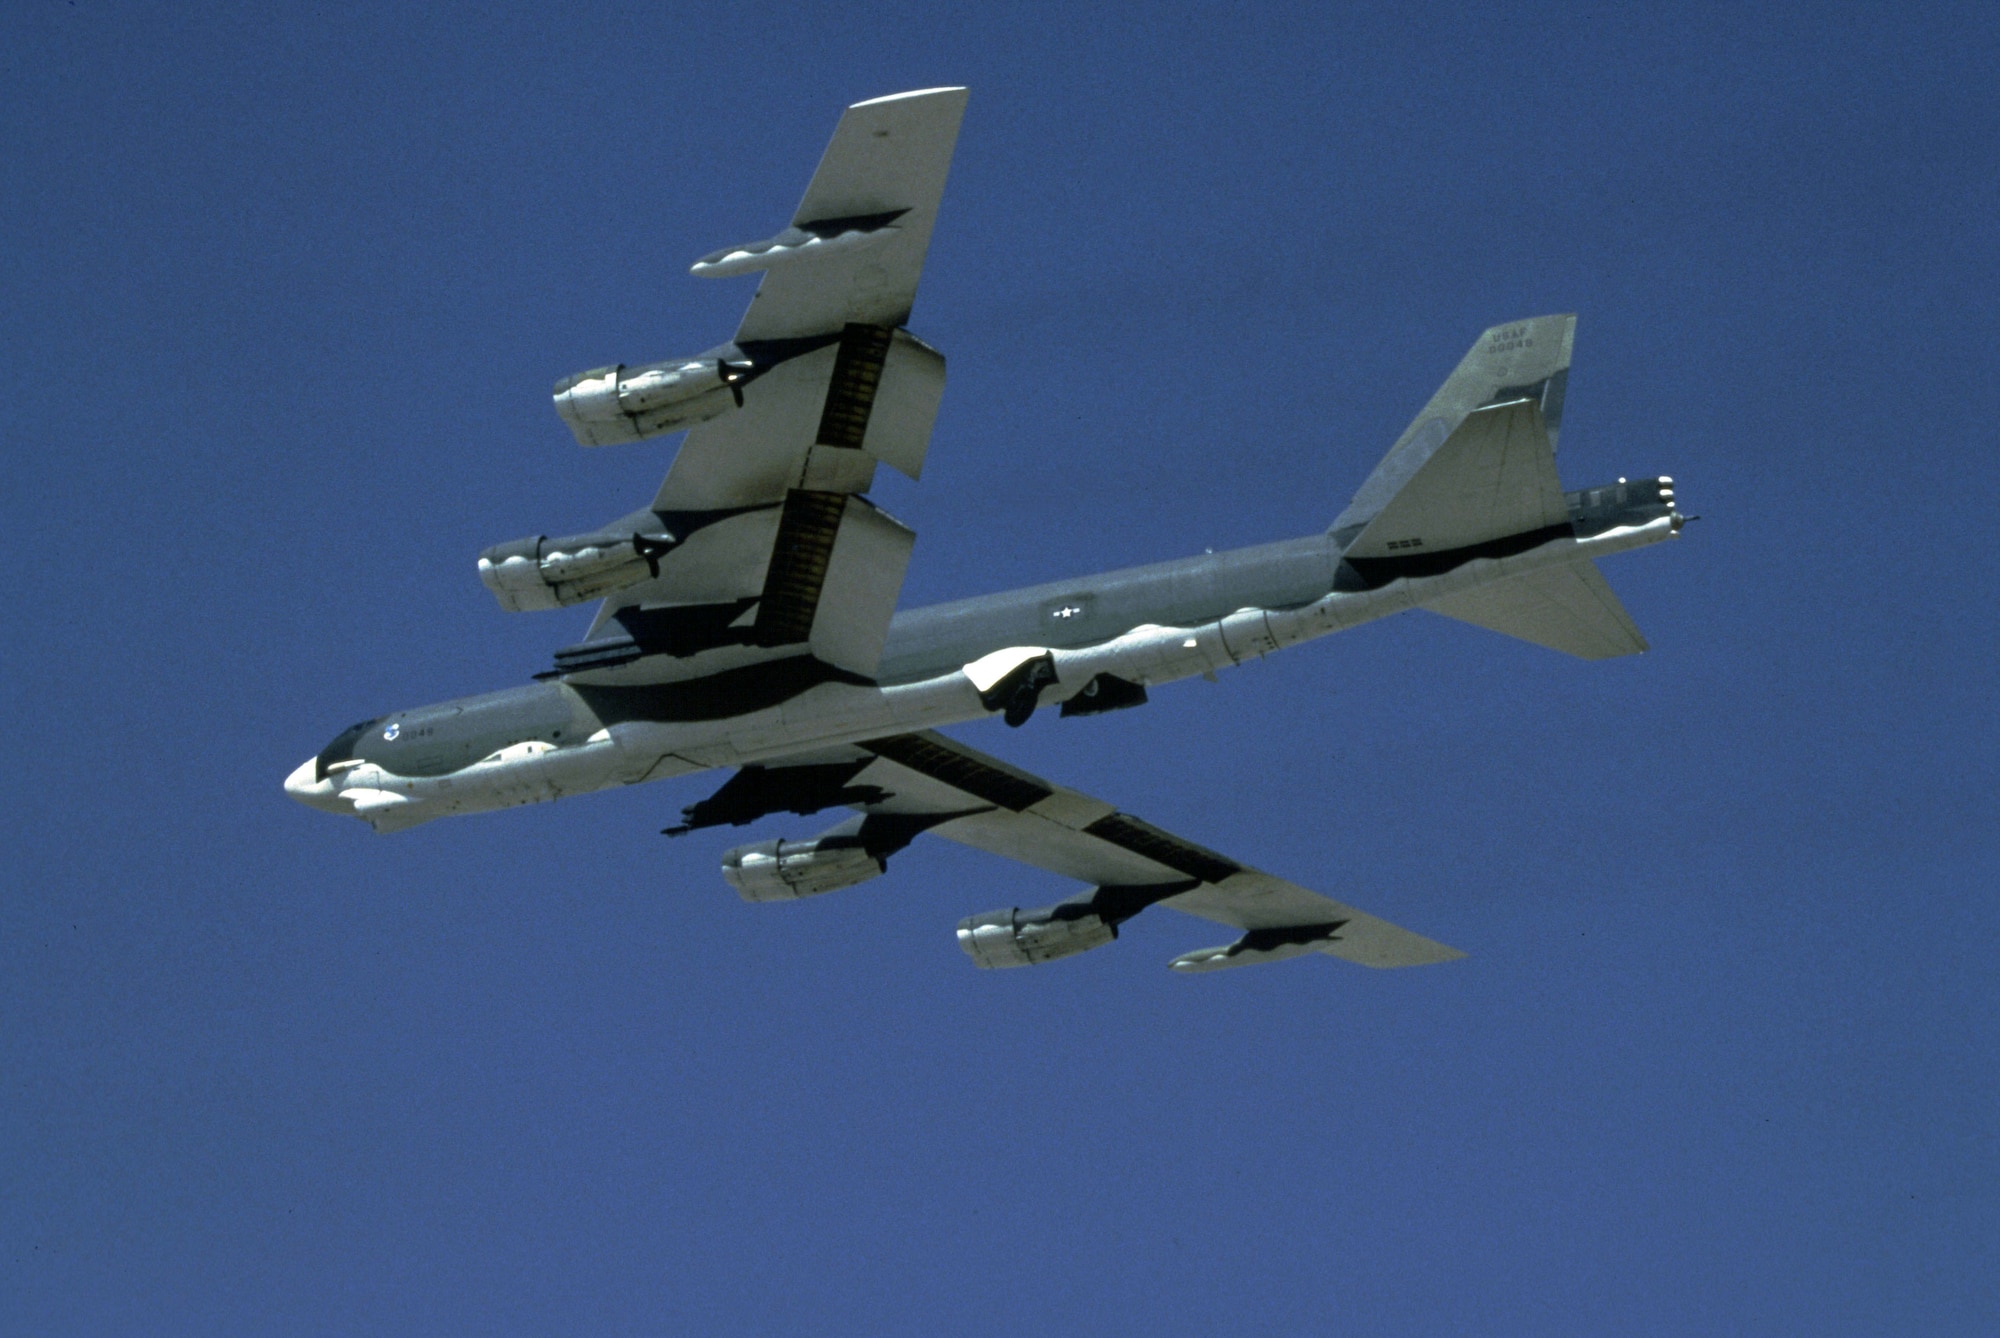 Stratofortress The Powerhouse of the Skies